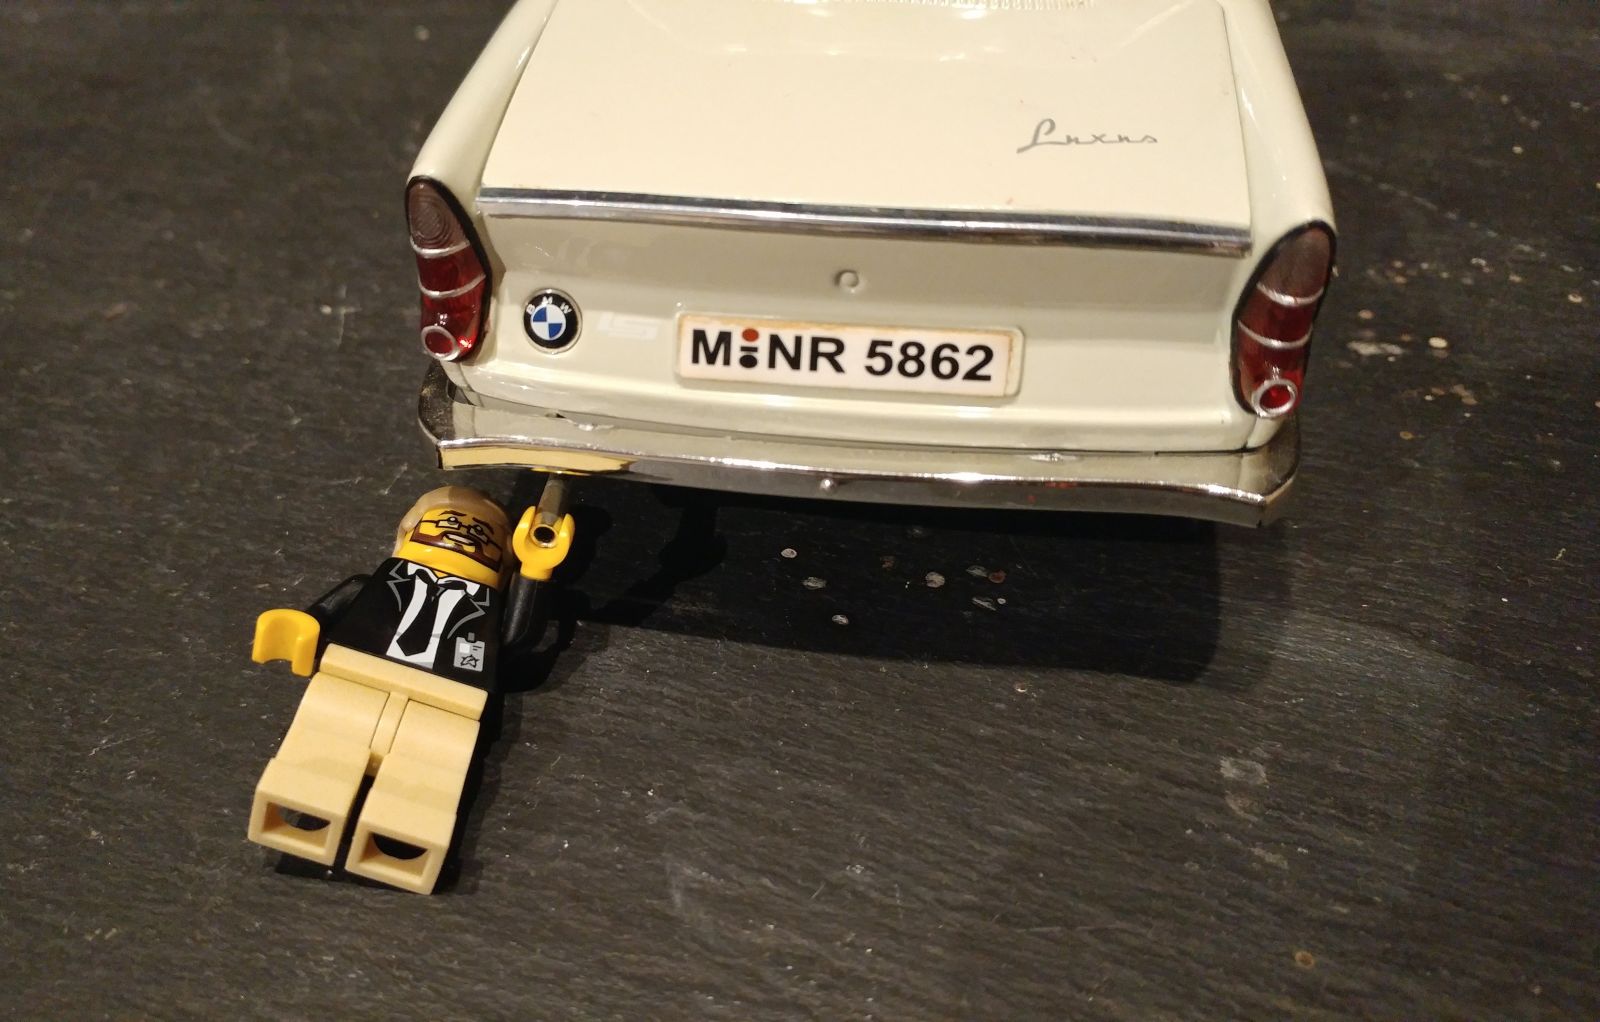 Illustration for article titled Teutonic Tuesday: BMW 700 Luxus, the Lego Chris Bangle Review